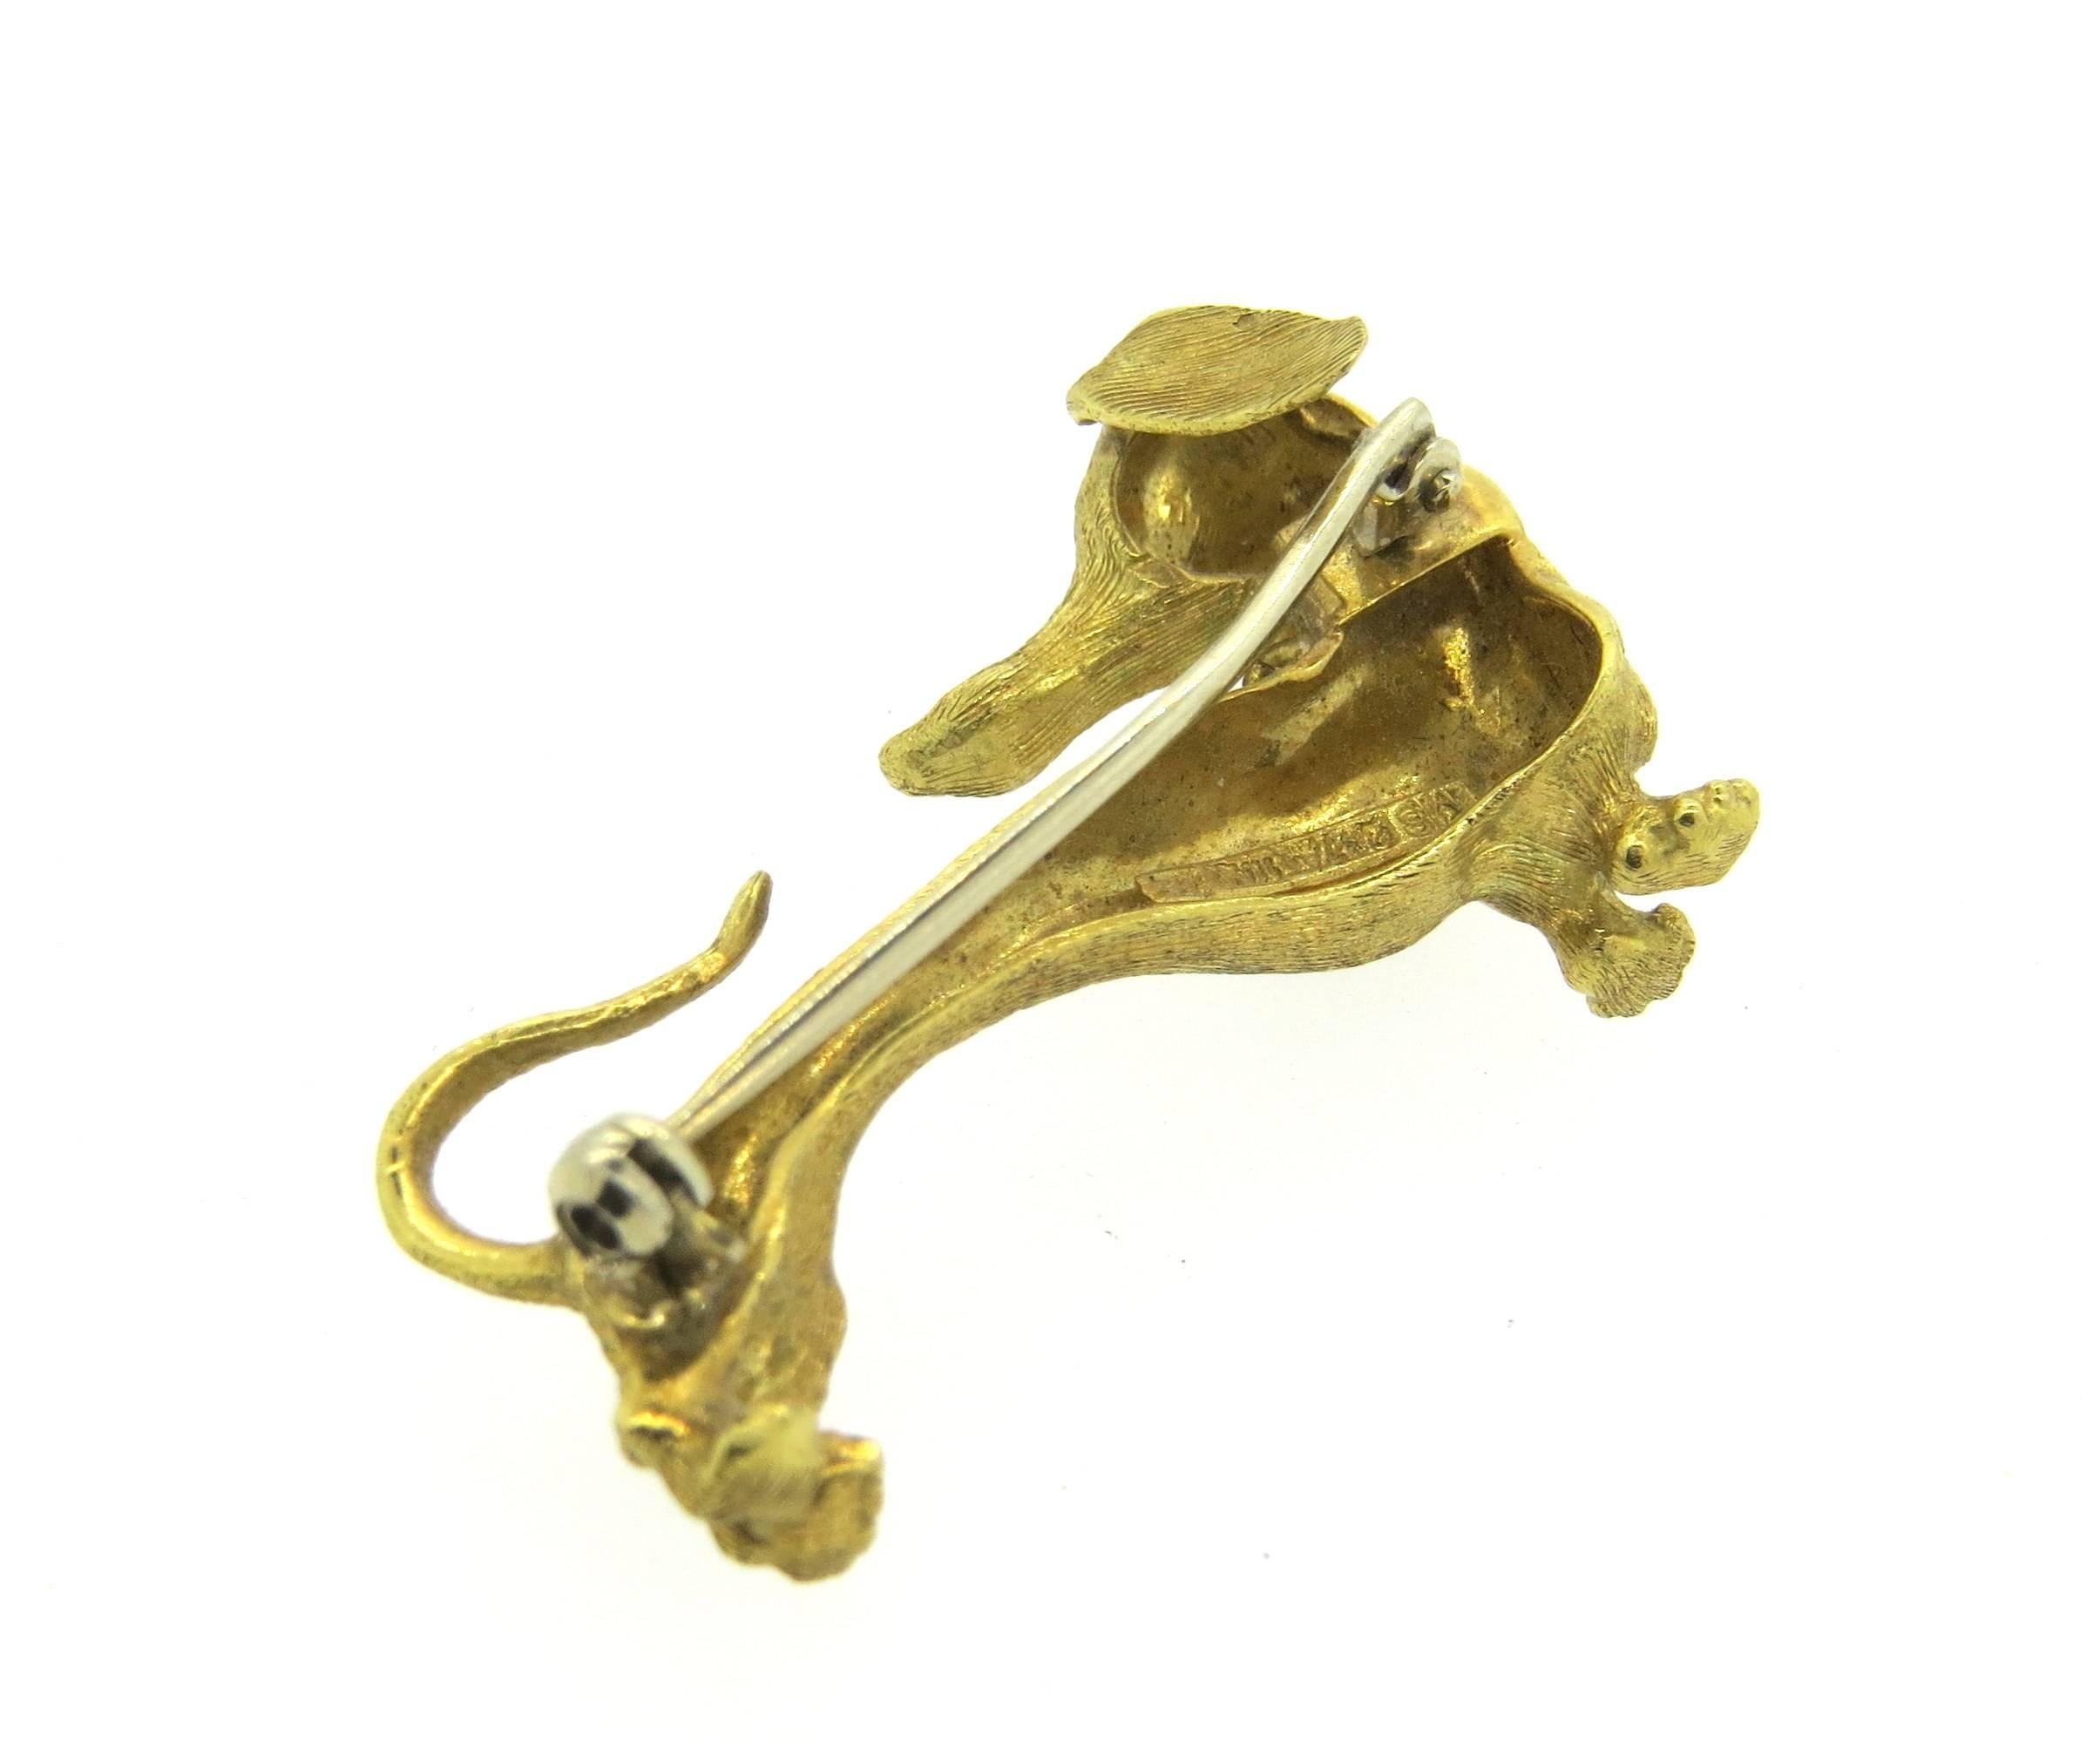 18k brushed yellow gold Dachshund dog brooch, decorated with a ruby eye. Brooch measures 36mm x 20mm. Weight of the piece - 9.6 grams